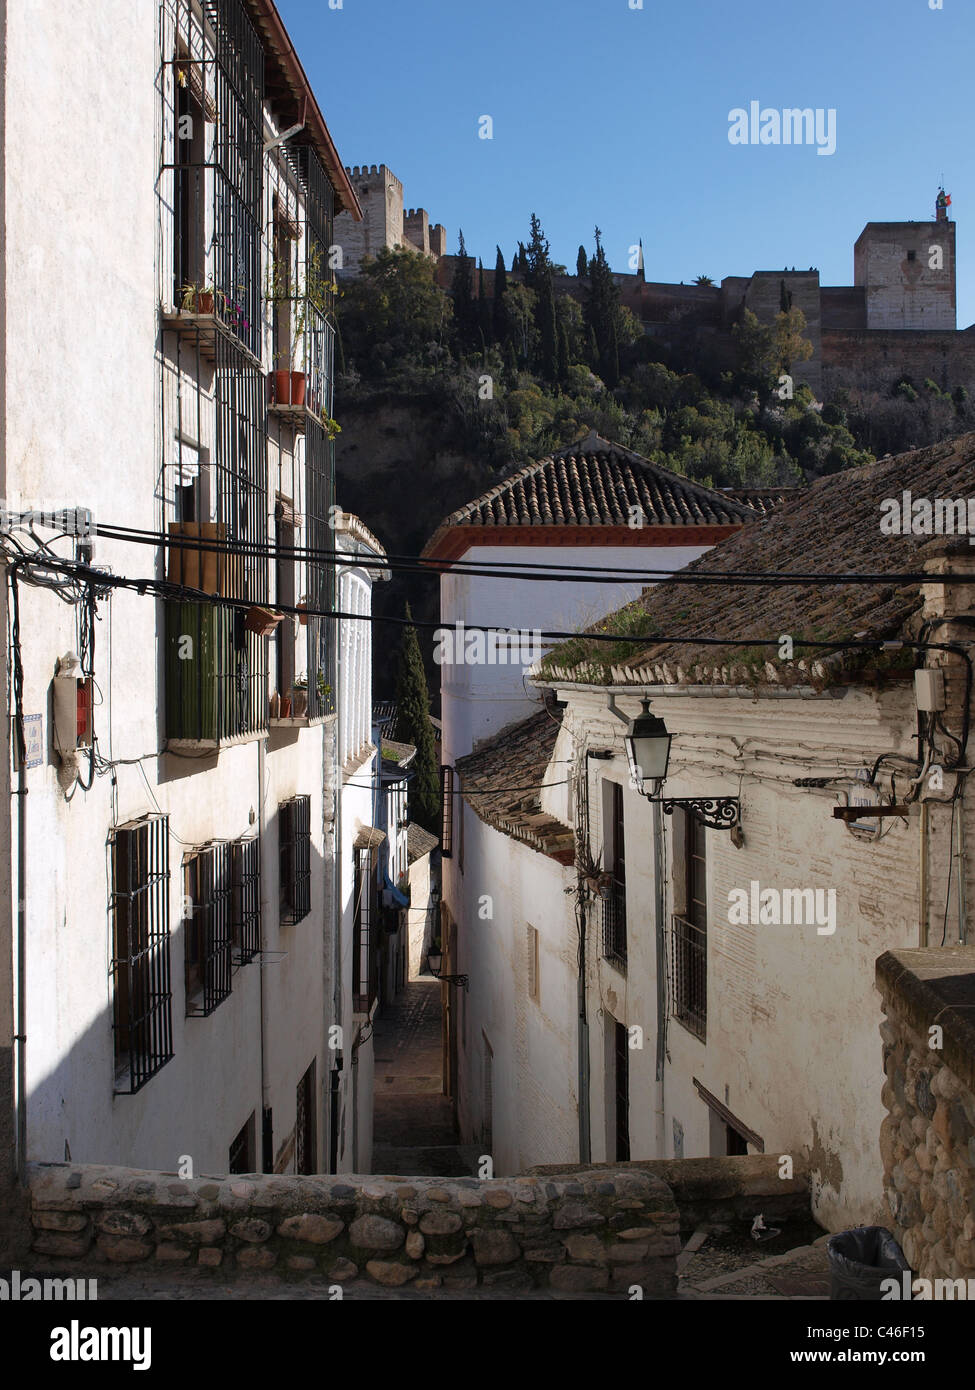 A side street in the old residential area overlooking the Alhambra in Granada, Spain. Stock Photo